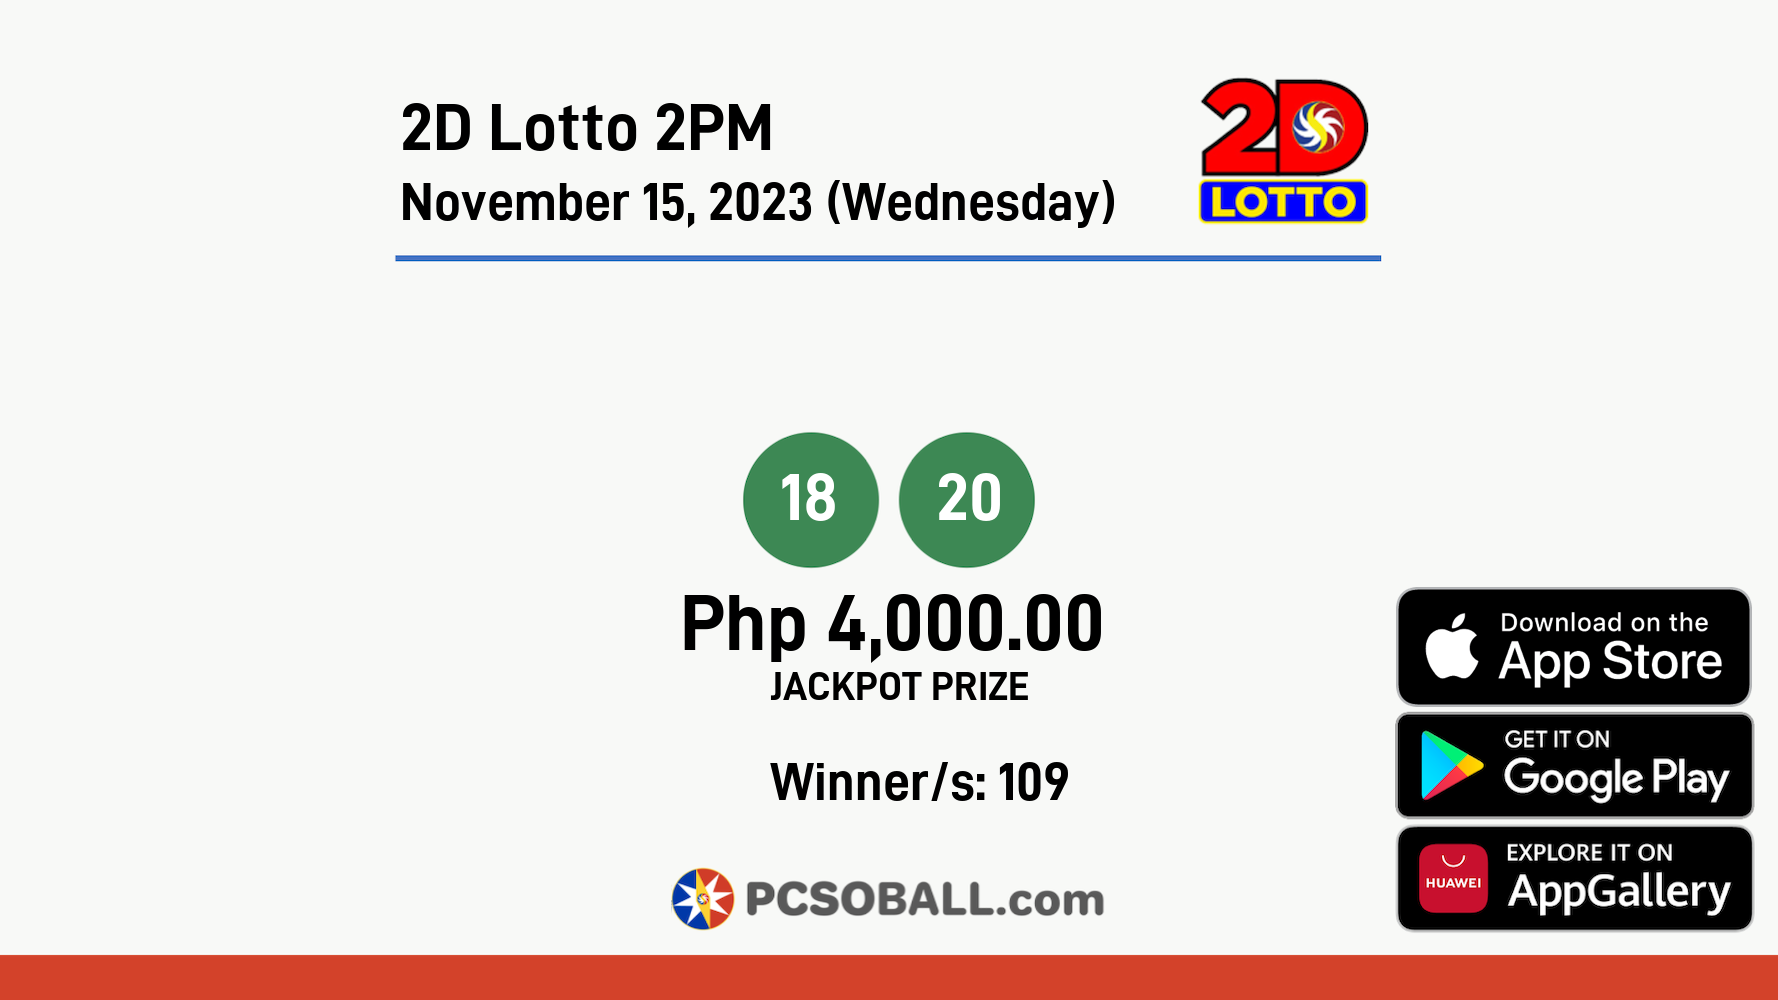 2D Lotto 2PM November 15, 2023 (Wednesday) Result